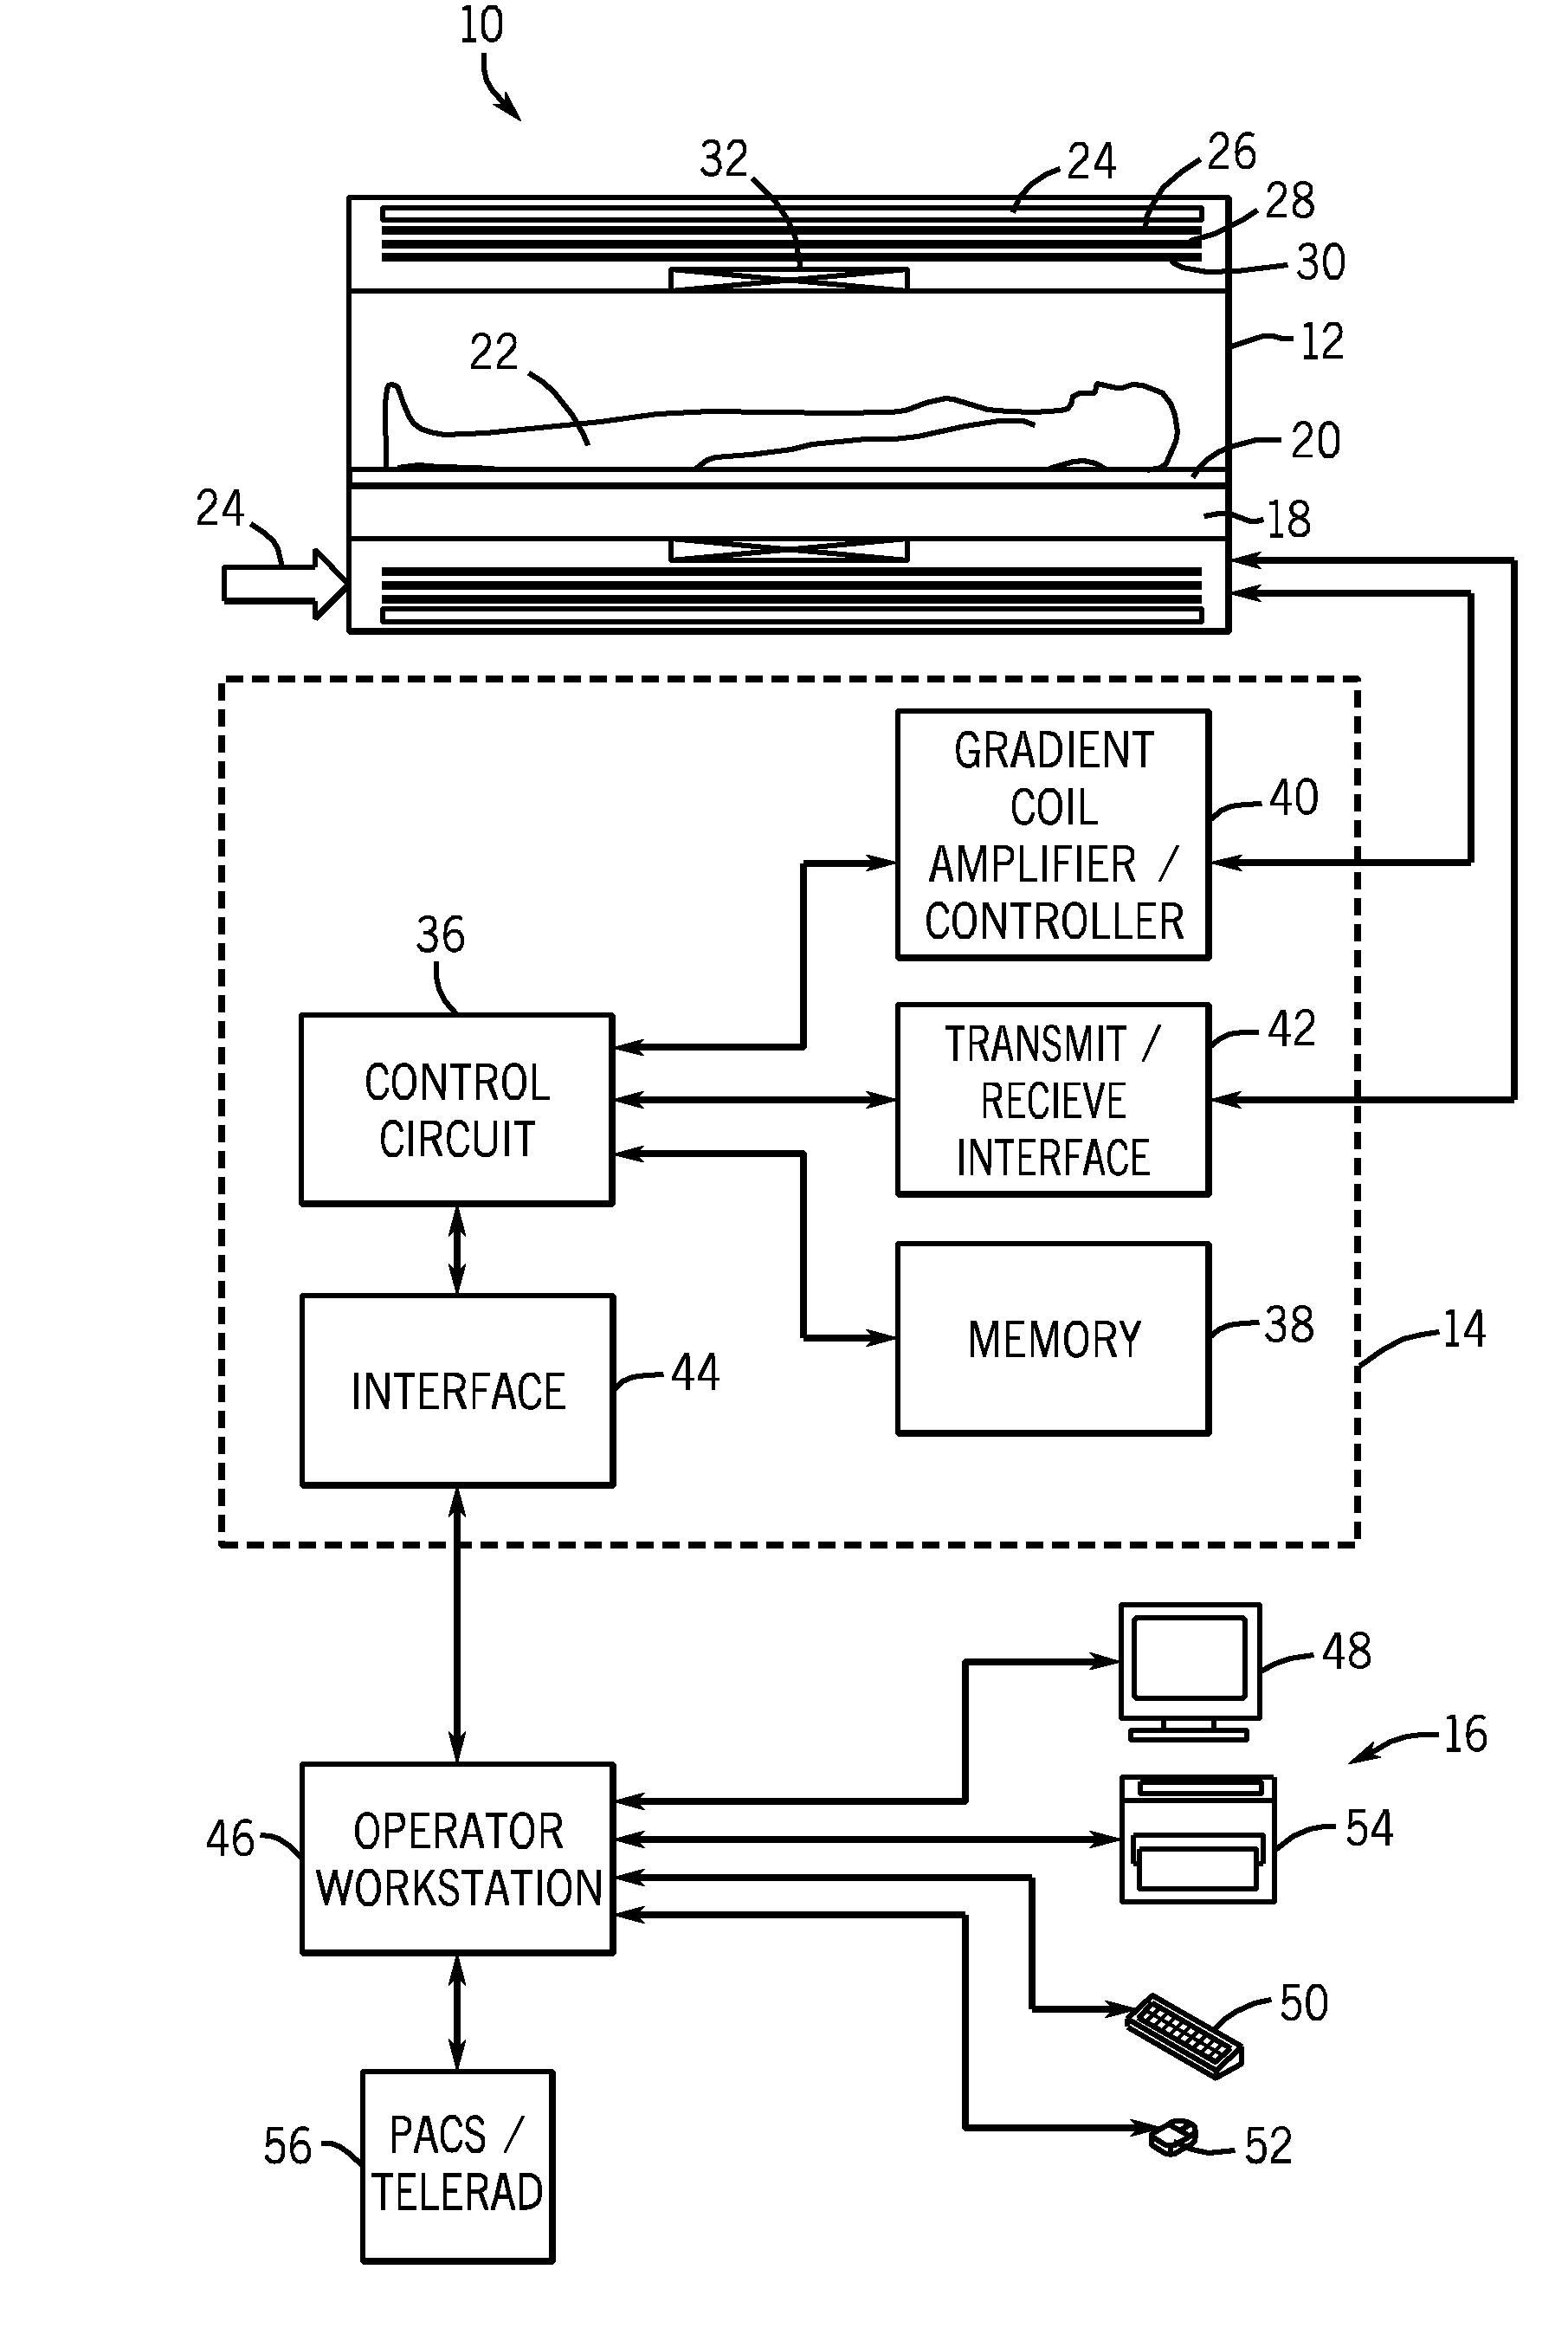 Method and system for modifying pulse sequences